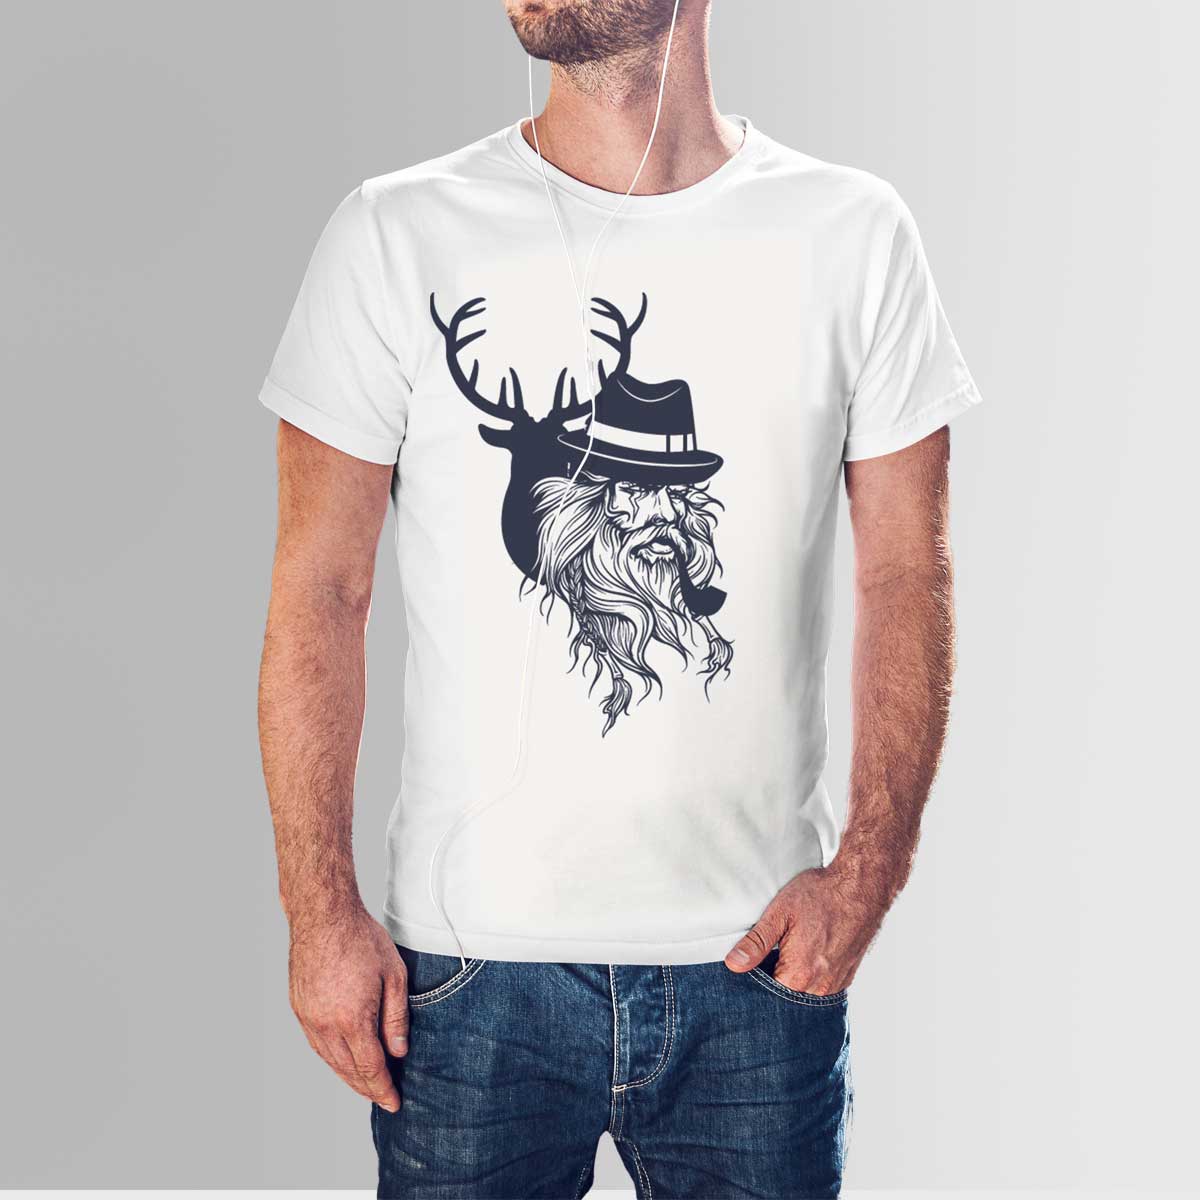 zoomdesignartes: How To Make Own T Shirt Design